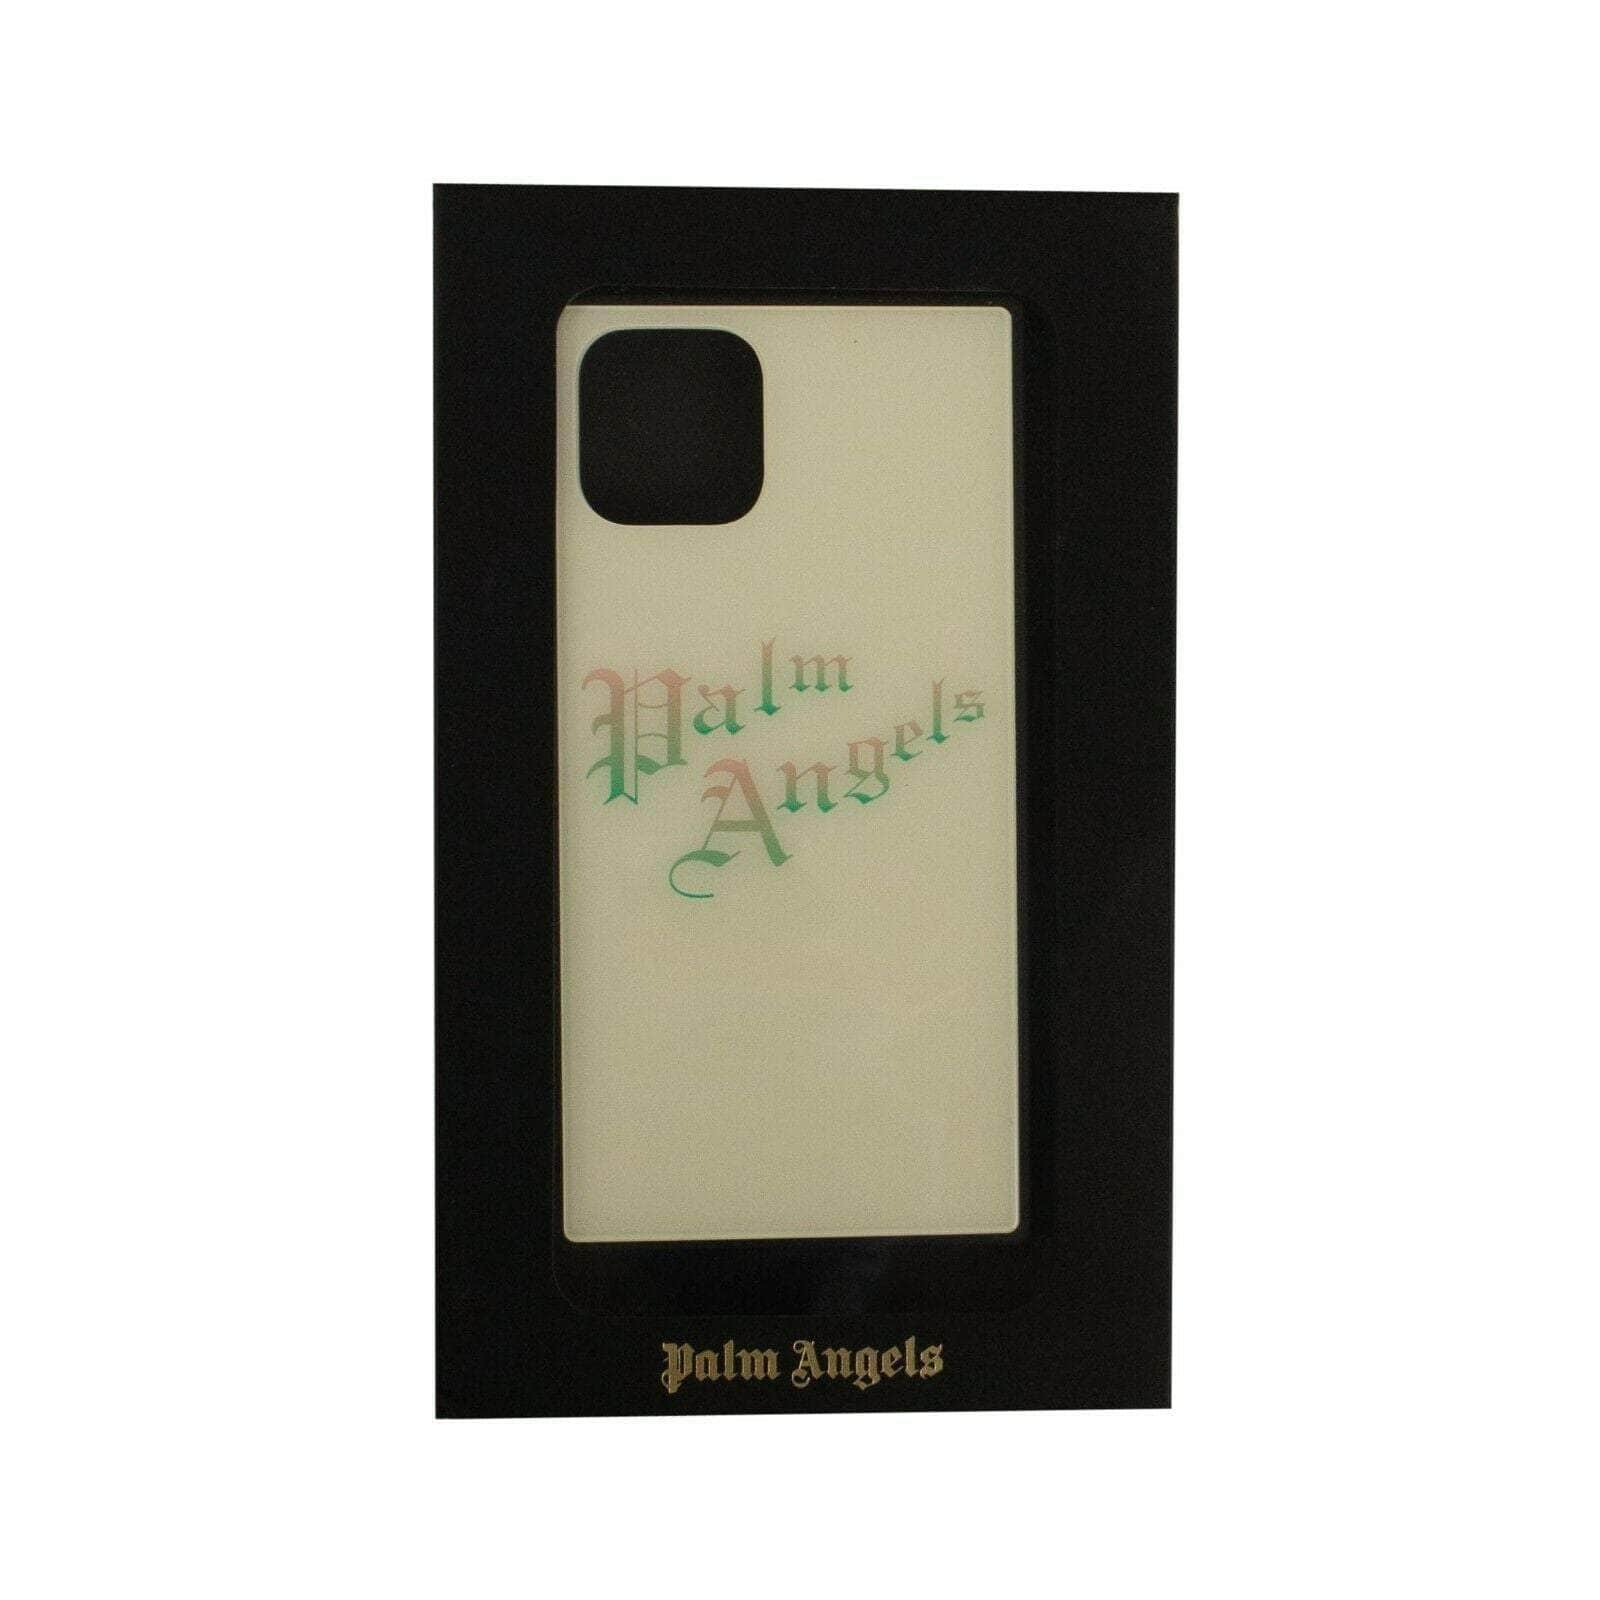 Palm Angels channelenable-all, chicmi, couponcollection, gender-mens, main-accessories, mens-shoes, palm-angels, size-os, tech-accessories, under-250 OS White Gothic Square Phone Case 95-PLM-3017/OS 95-PLM-3017/OS